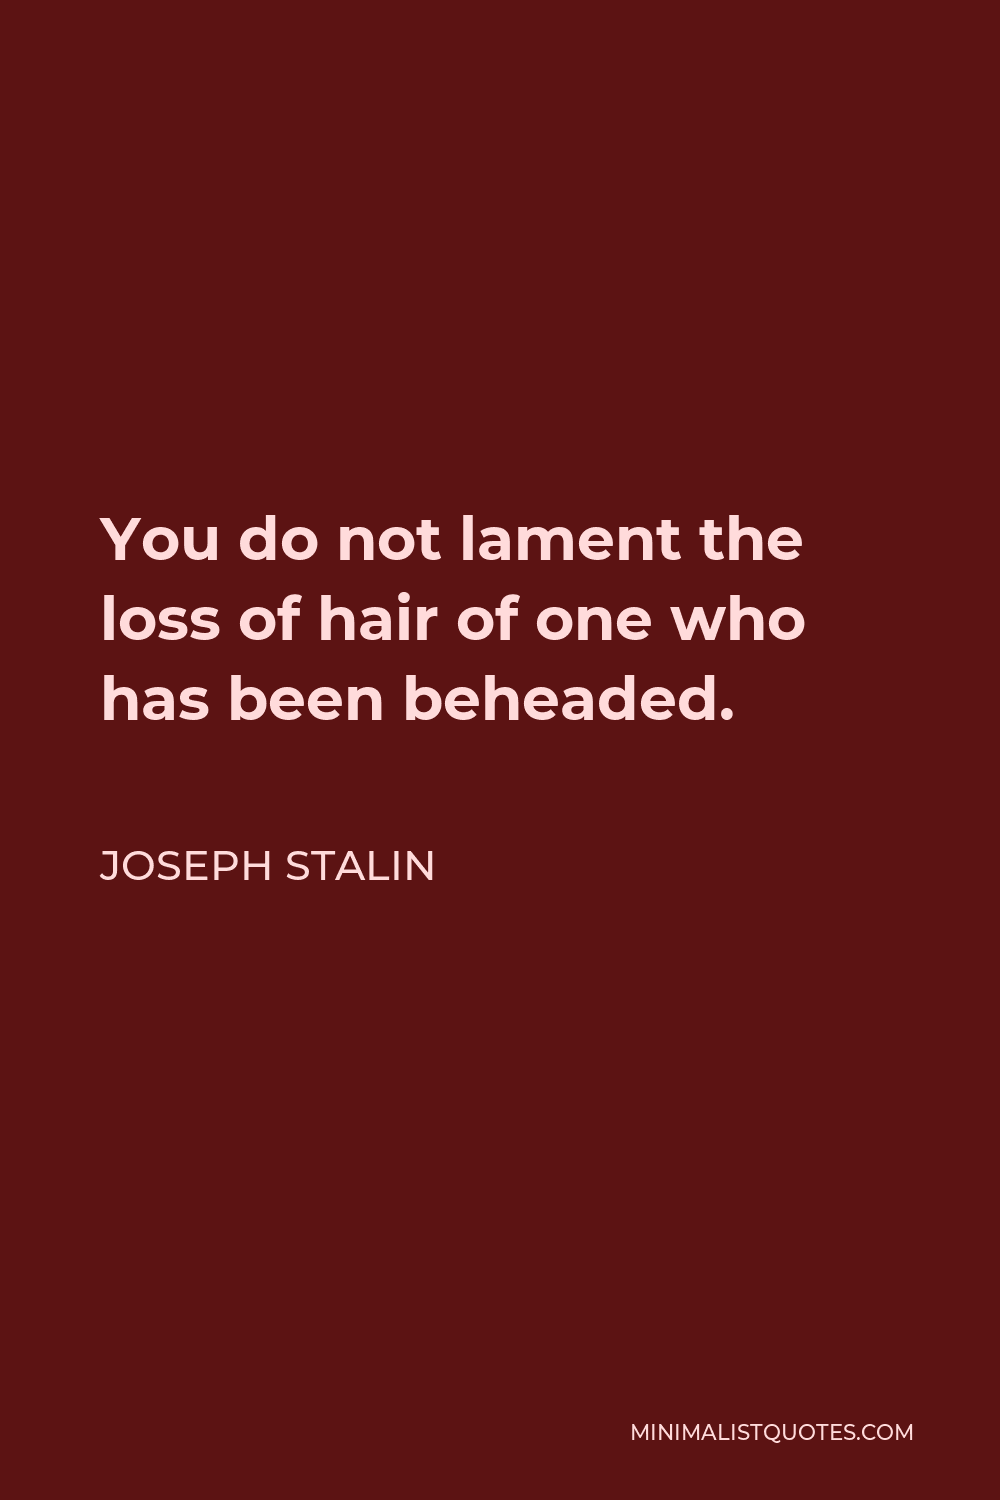 Joseph Stalin Quote - You do not lament the loss of hair of one who has been beheaded.